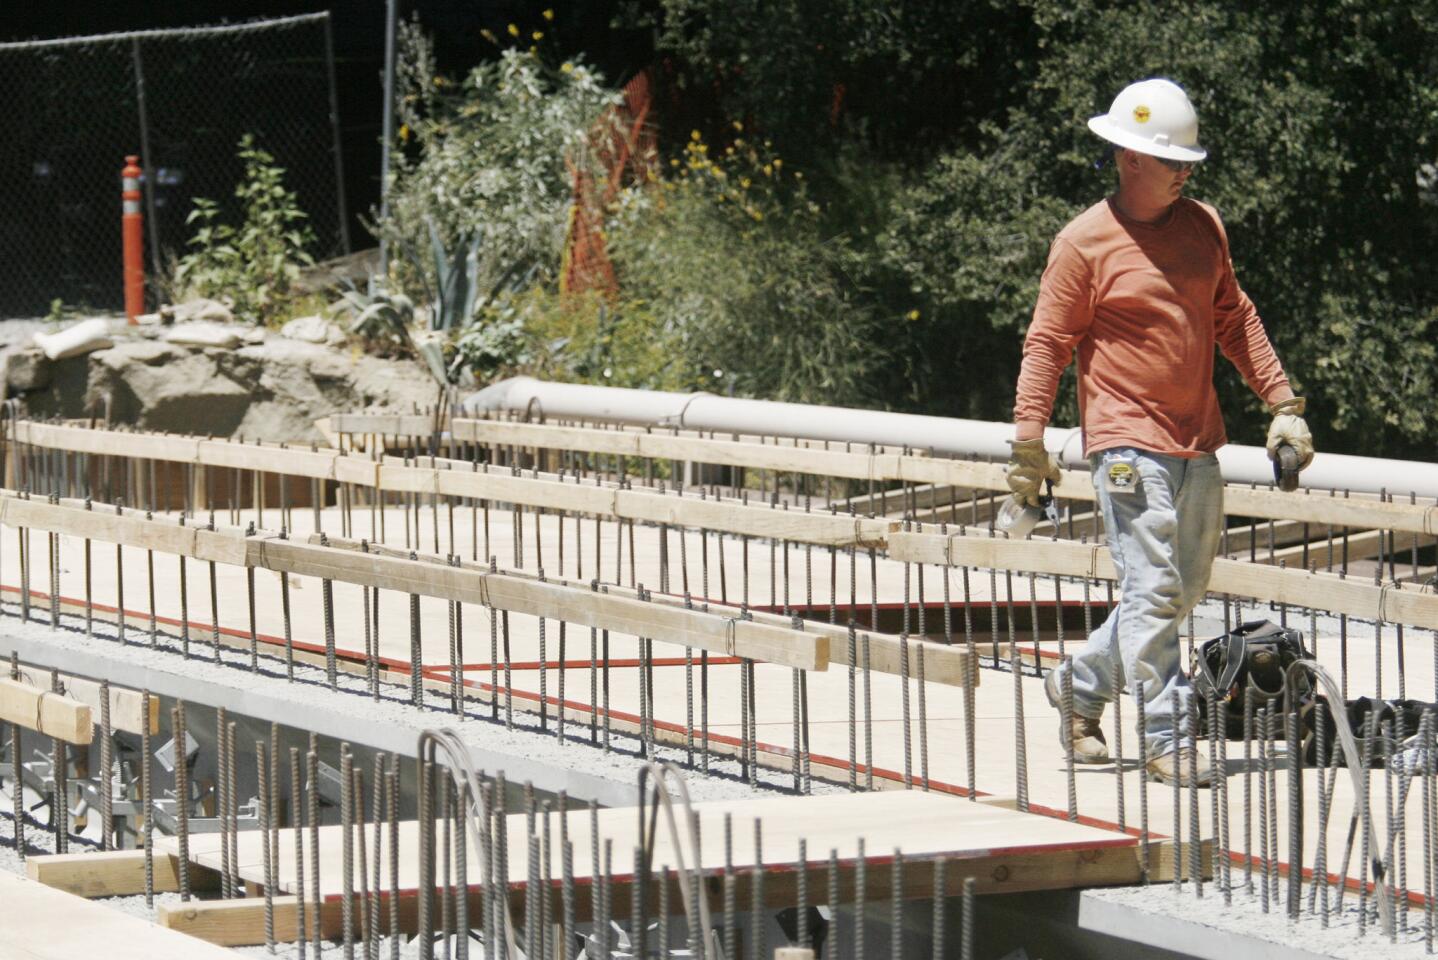 Construction workers reconstruct a bridge on Jessen Dr. in La Canada on Wednesday, June 27, 2012.